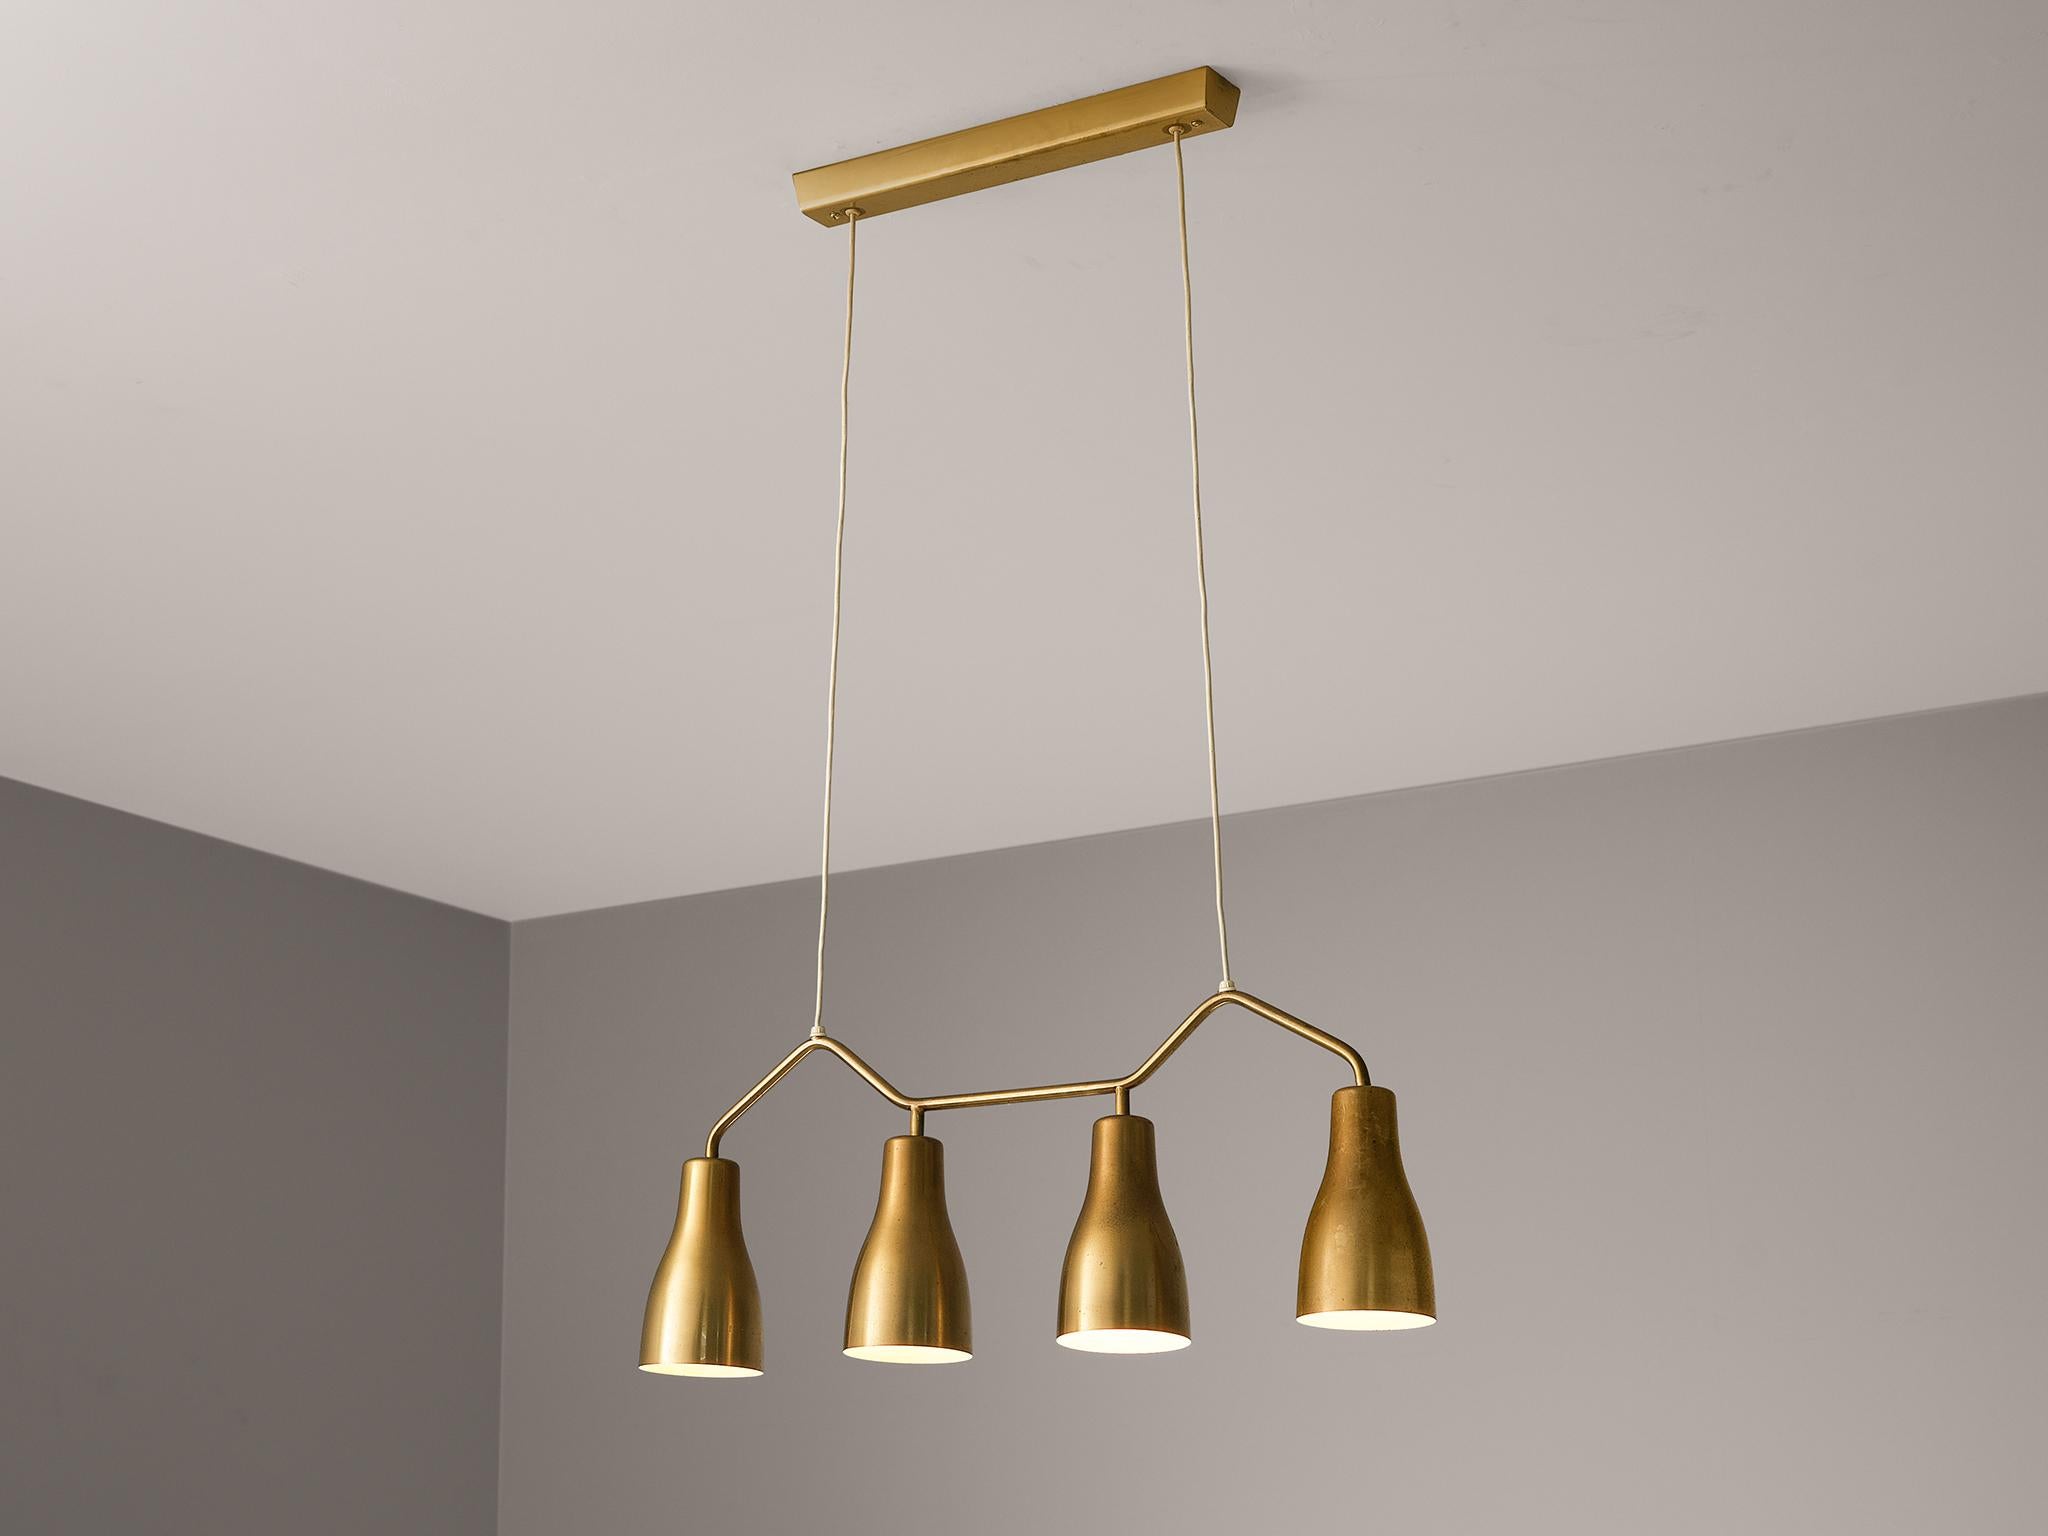 Hans Bergström for Ateljé Lyktan, chandelier, brass, Sweden, 1950s

This chandelier features a charming composition based on four cone-shaped shades fixated to a geometrical frame based on curved lines. The body gets beautifully suspended and due to